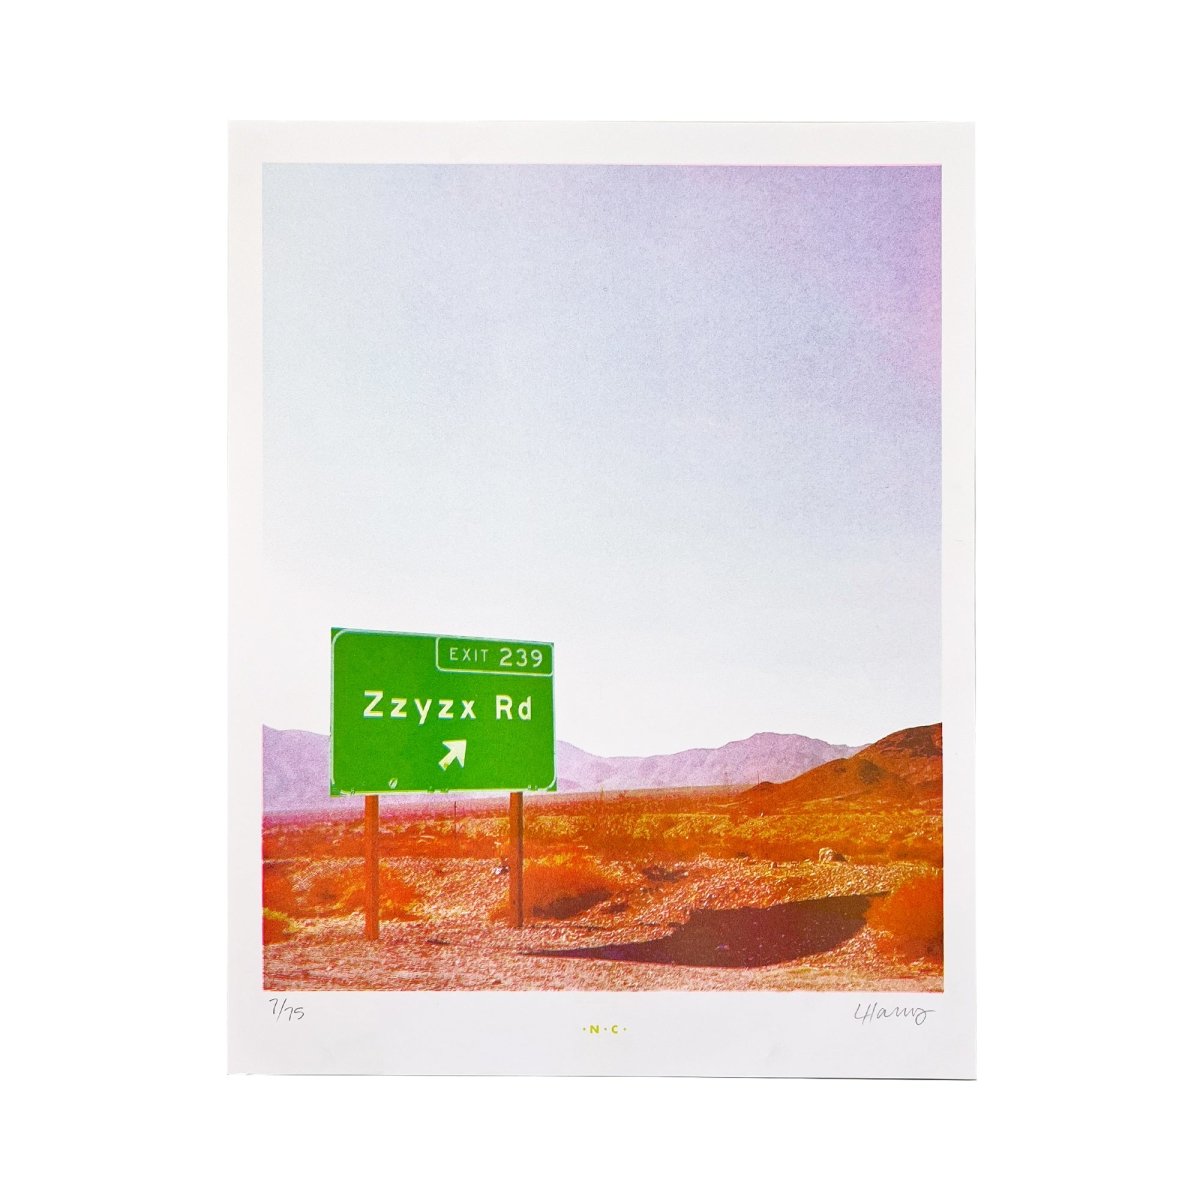 Zzyzx Road - Limited Edition Risograph Art Print